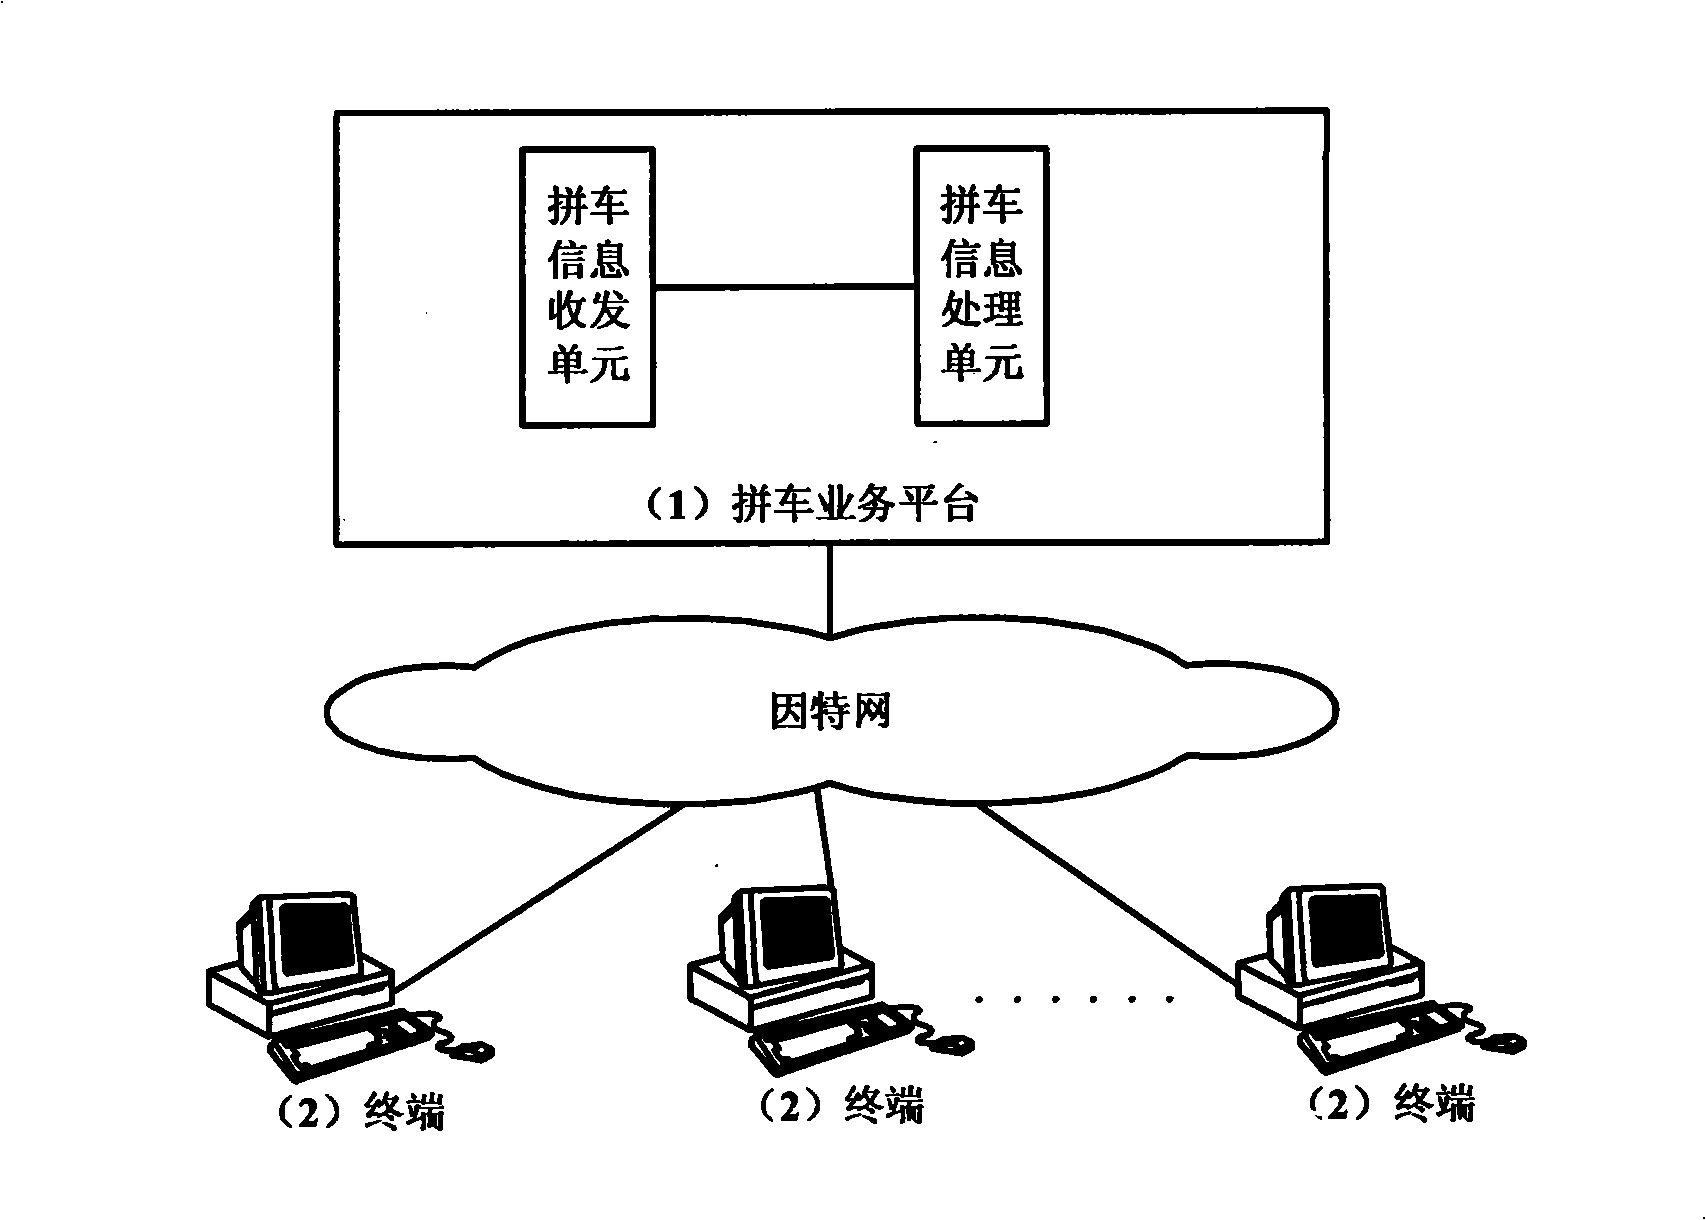 System and method for real time pooling vehicle